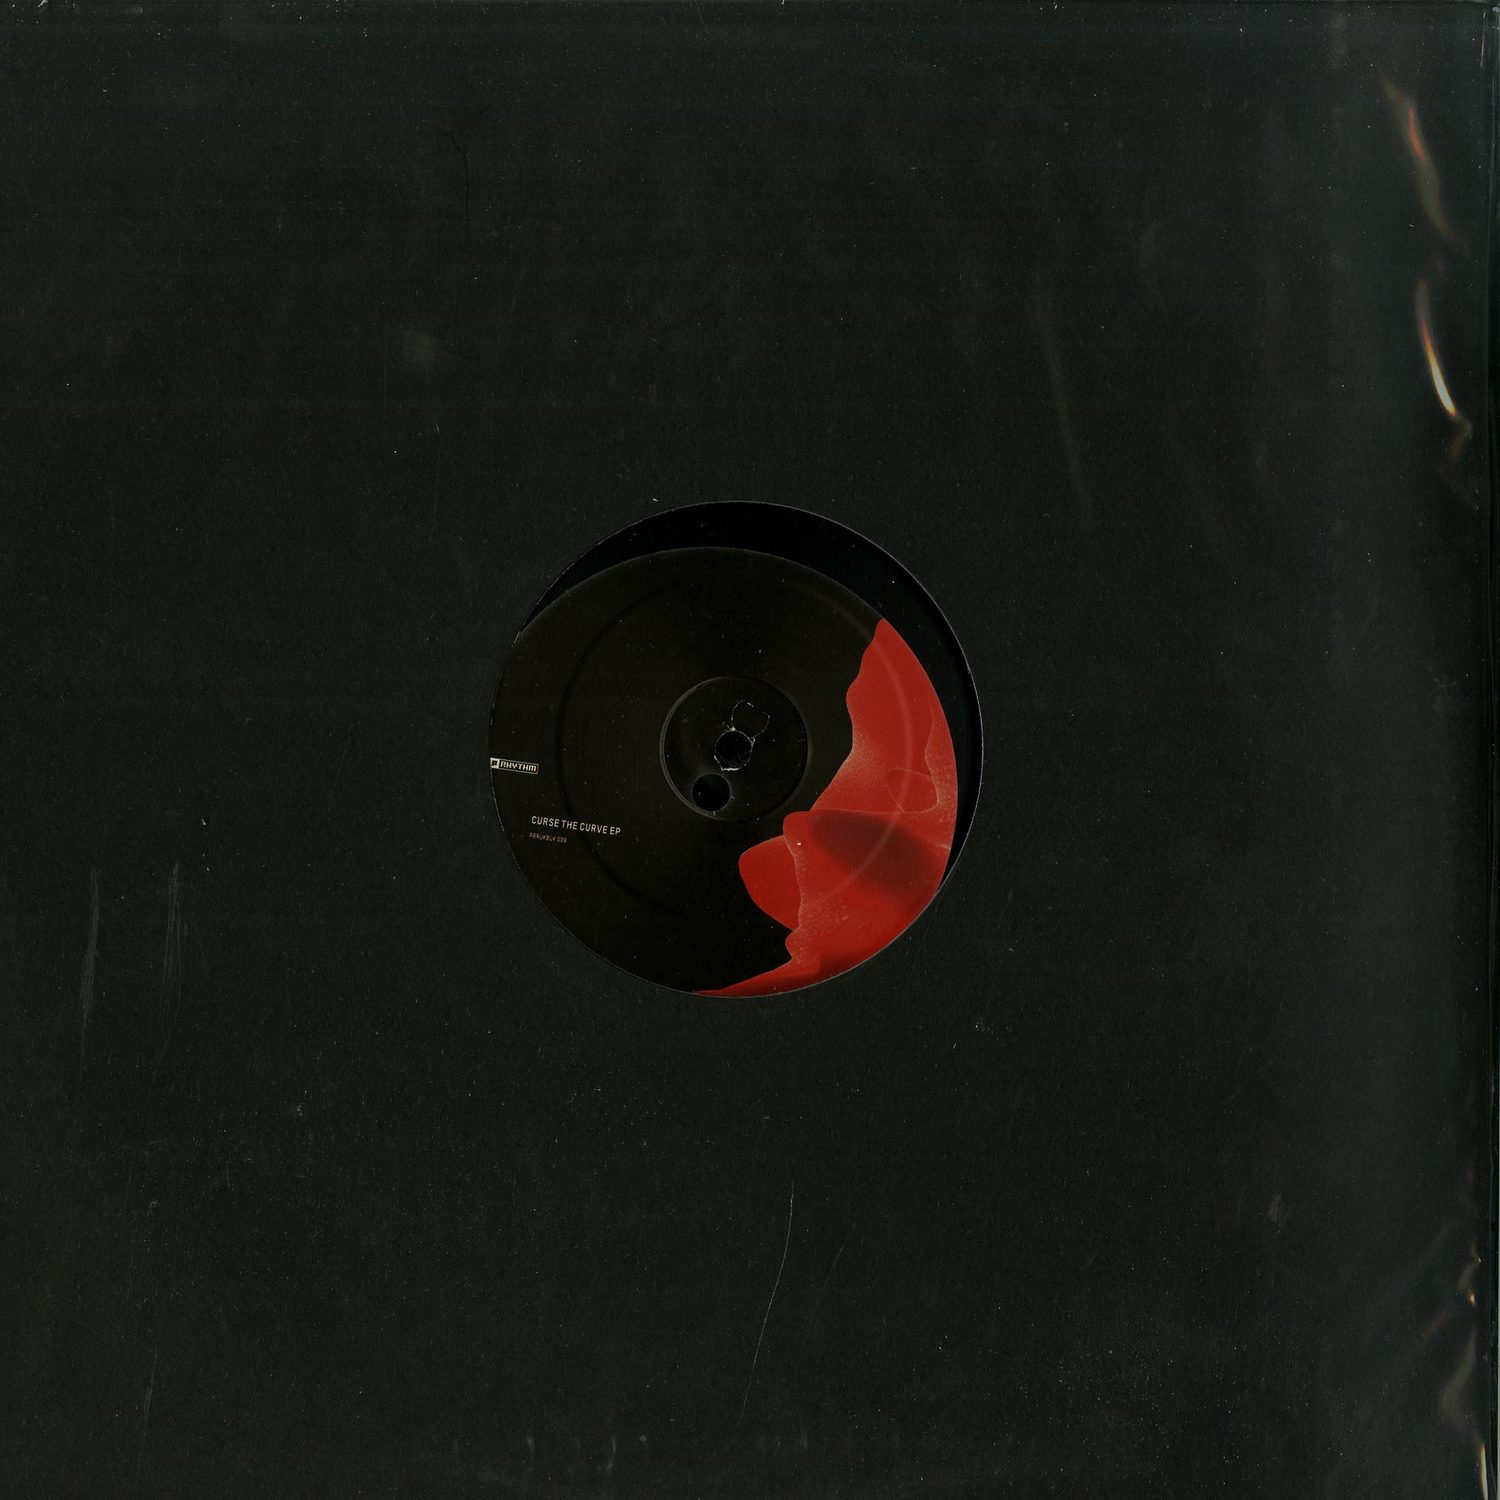 Bas Mooy / Stanny Franssen & Ortin Cam / Jamie Haus - PLANET RHYTHM PACK INCL. 82 / BLK009 / BLK011 